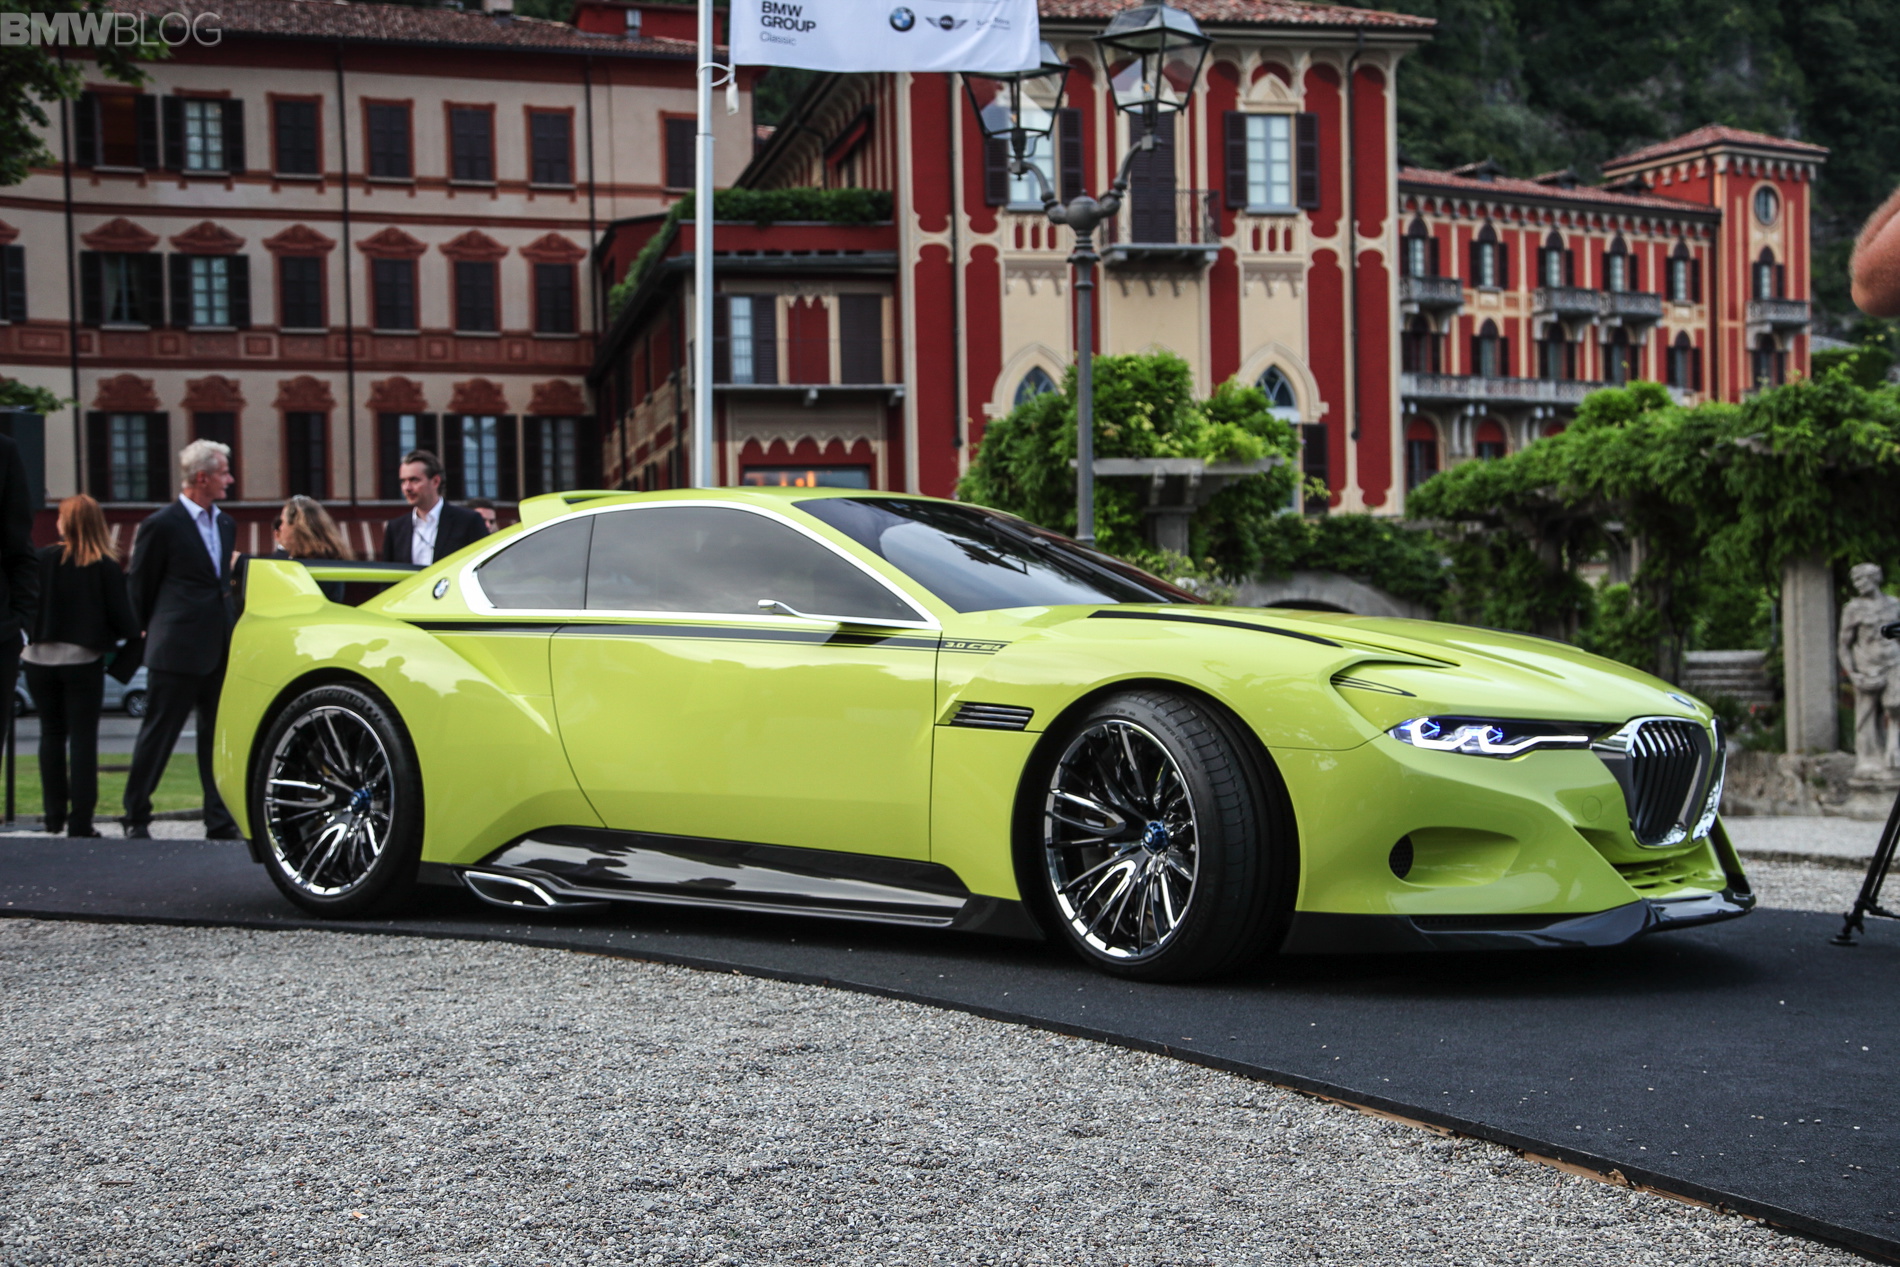 2015 -[BMW] 3.0 CSL Hommage - Page 4 Bmw-3_0_csl_hommage-1900x1200-wallpapers-73